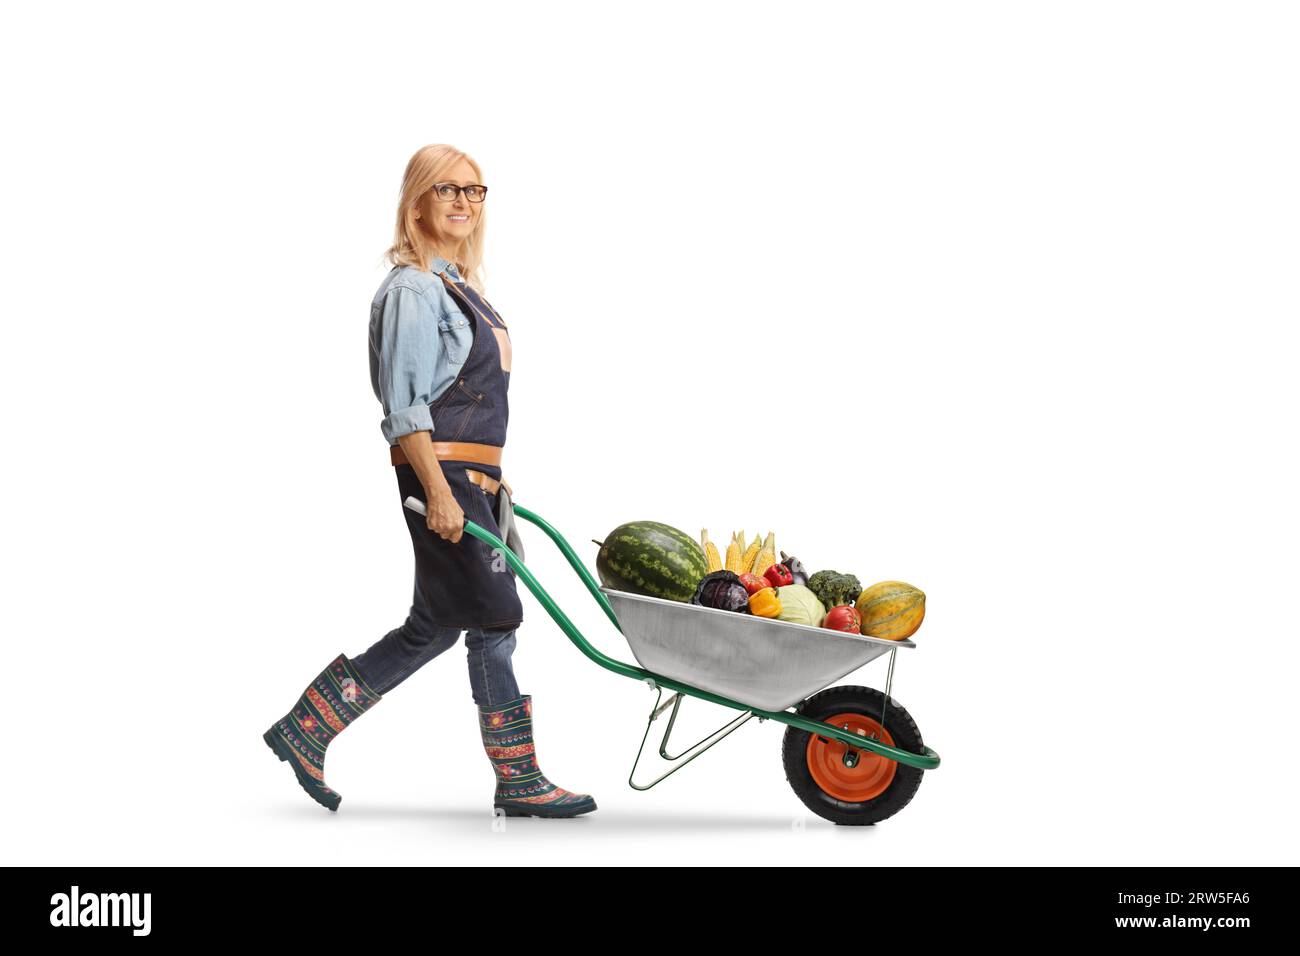 Full length profile shot of a woman farmer pushing a wheelbarrow full of fruits and vegetables isolated on white background Stock Photo